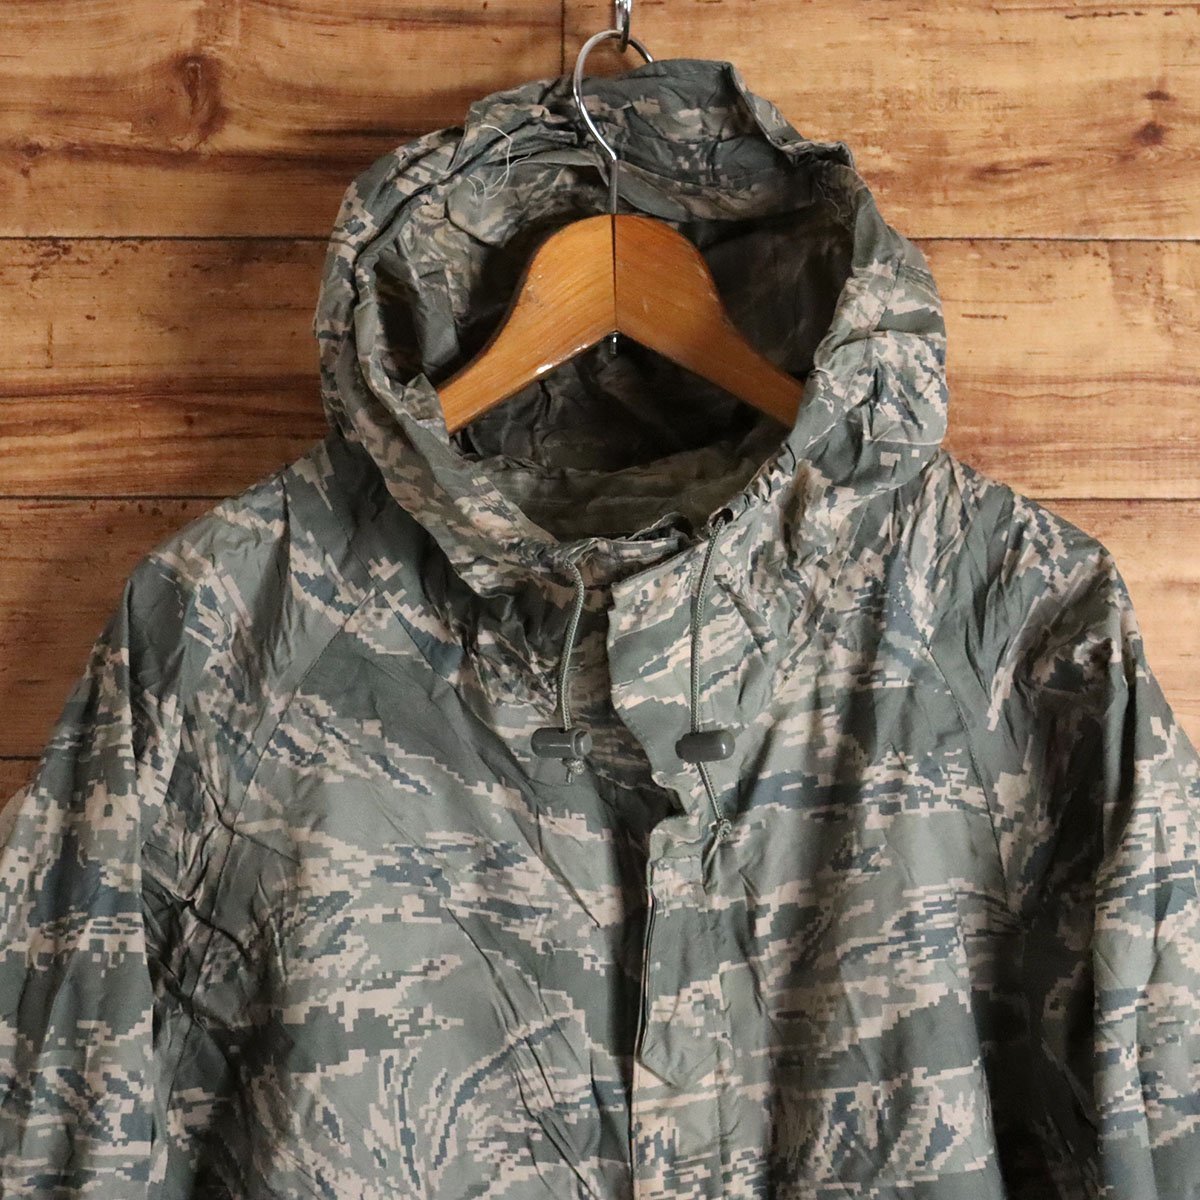 A4S/R1.26-1　米軍 US ARMY ORC Industries/Improved Rainsuit Parka デジタルタイガーカモ レインパーカー ミリタリージャケット XS 古着_画像2